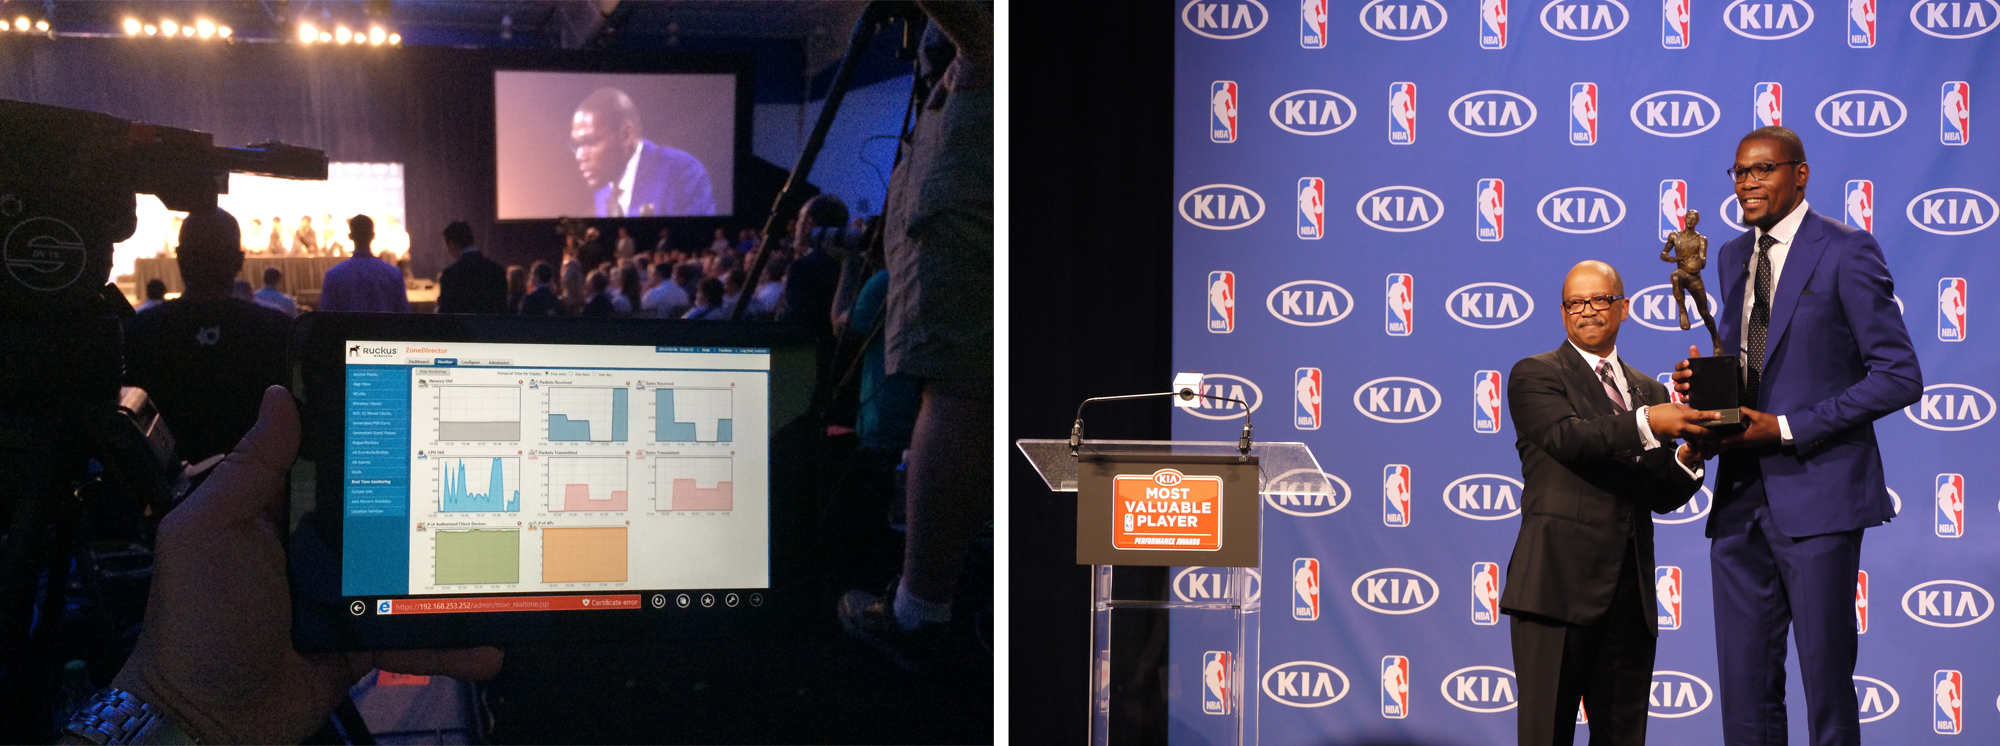 InterWorks monitoring Ruckus Wireless network at Kevin Durant MVP press conference